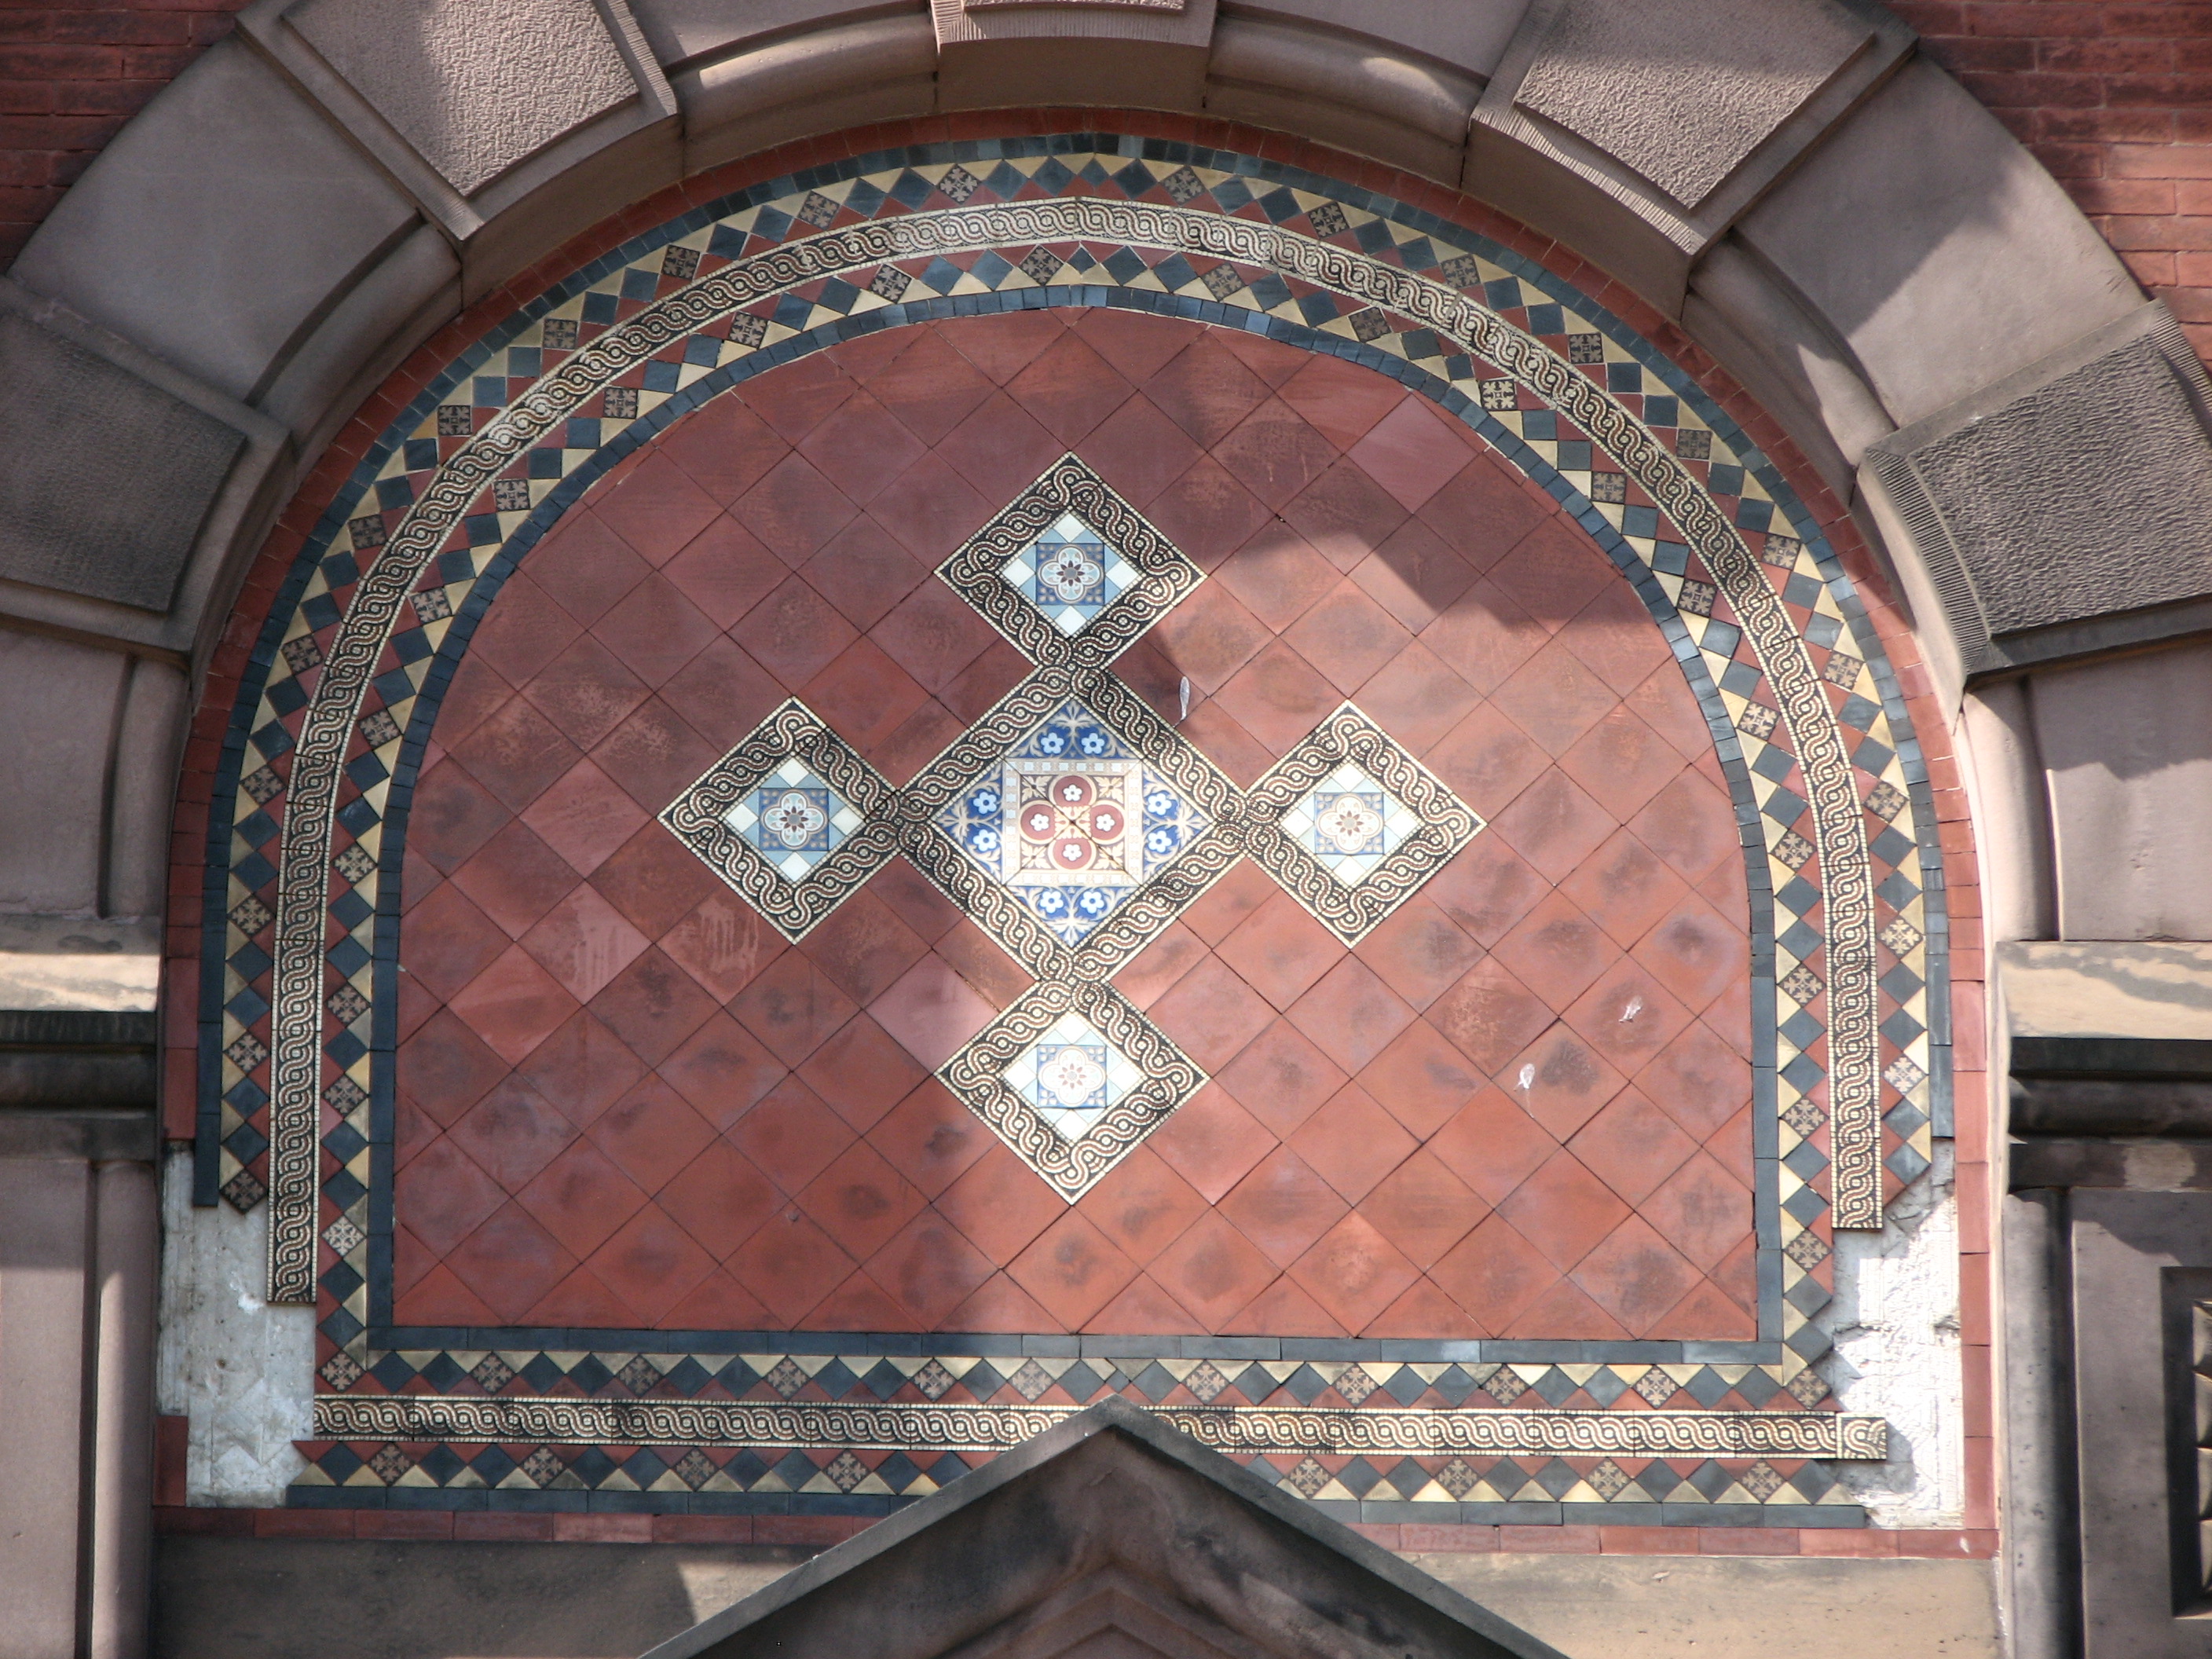 The building’s elaborate tile designs have started to deteriorate.